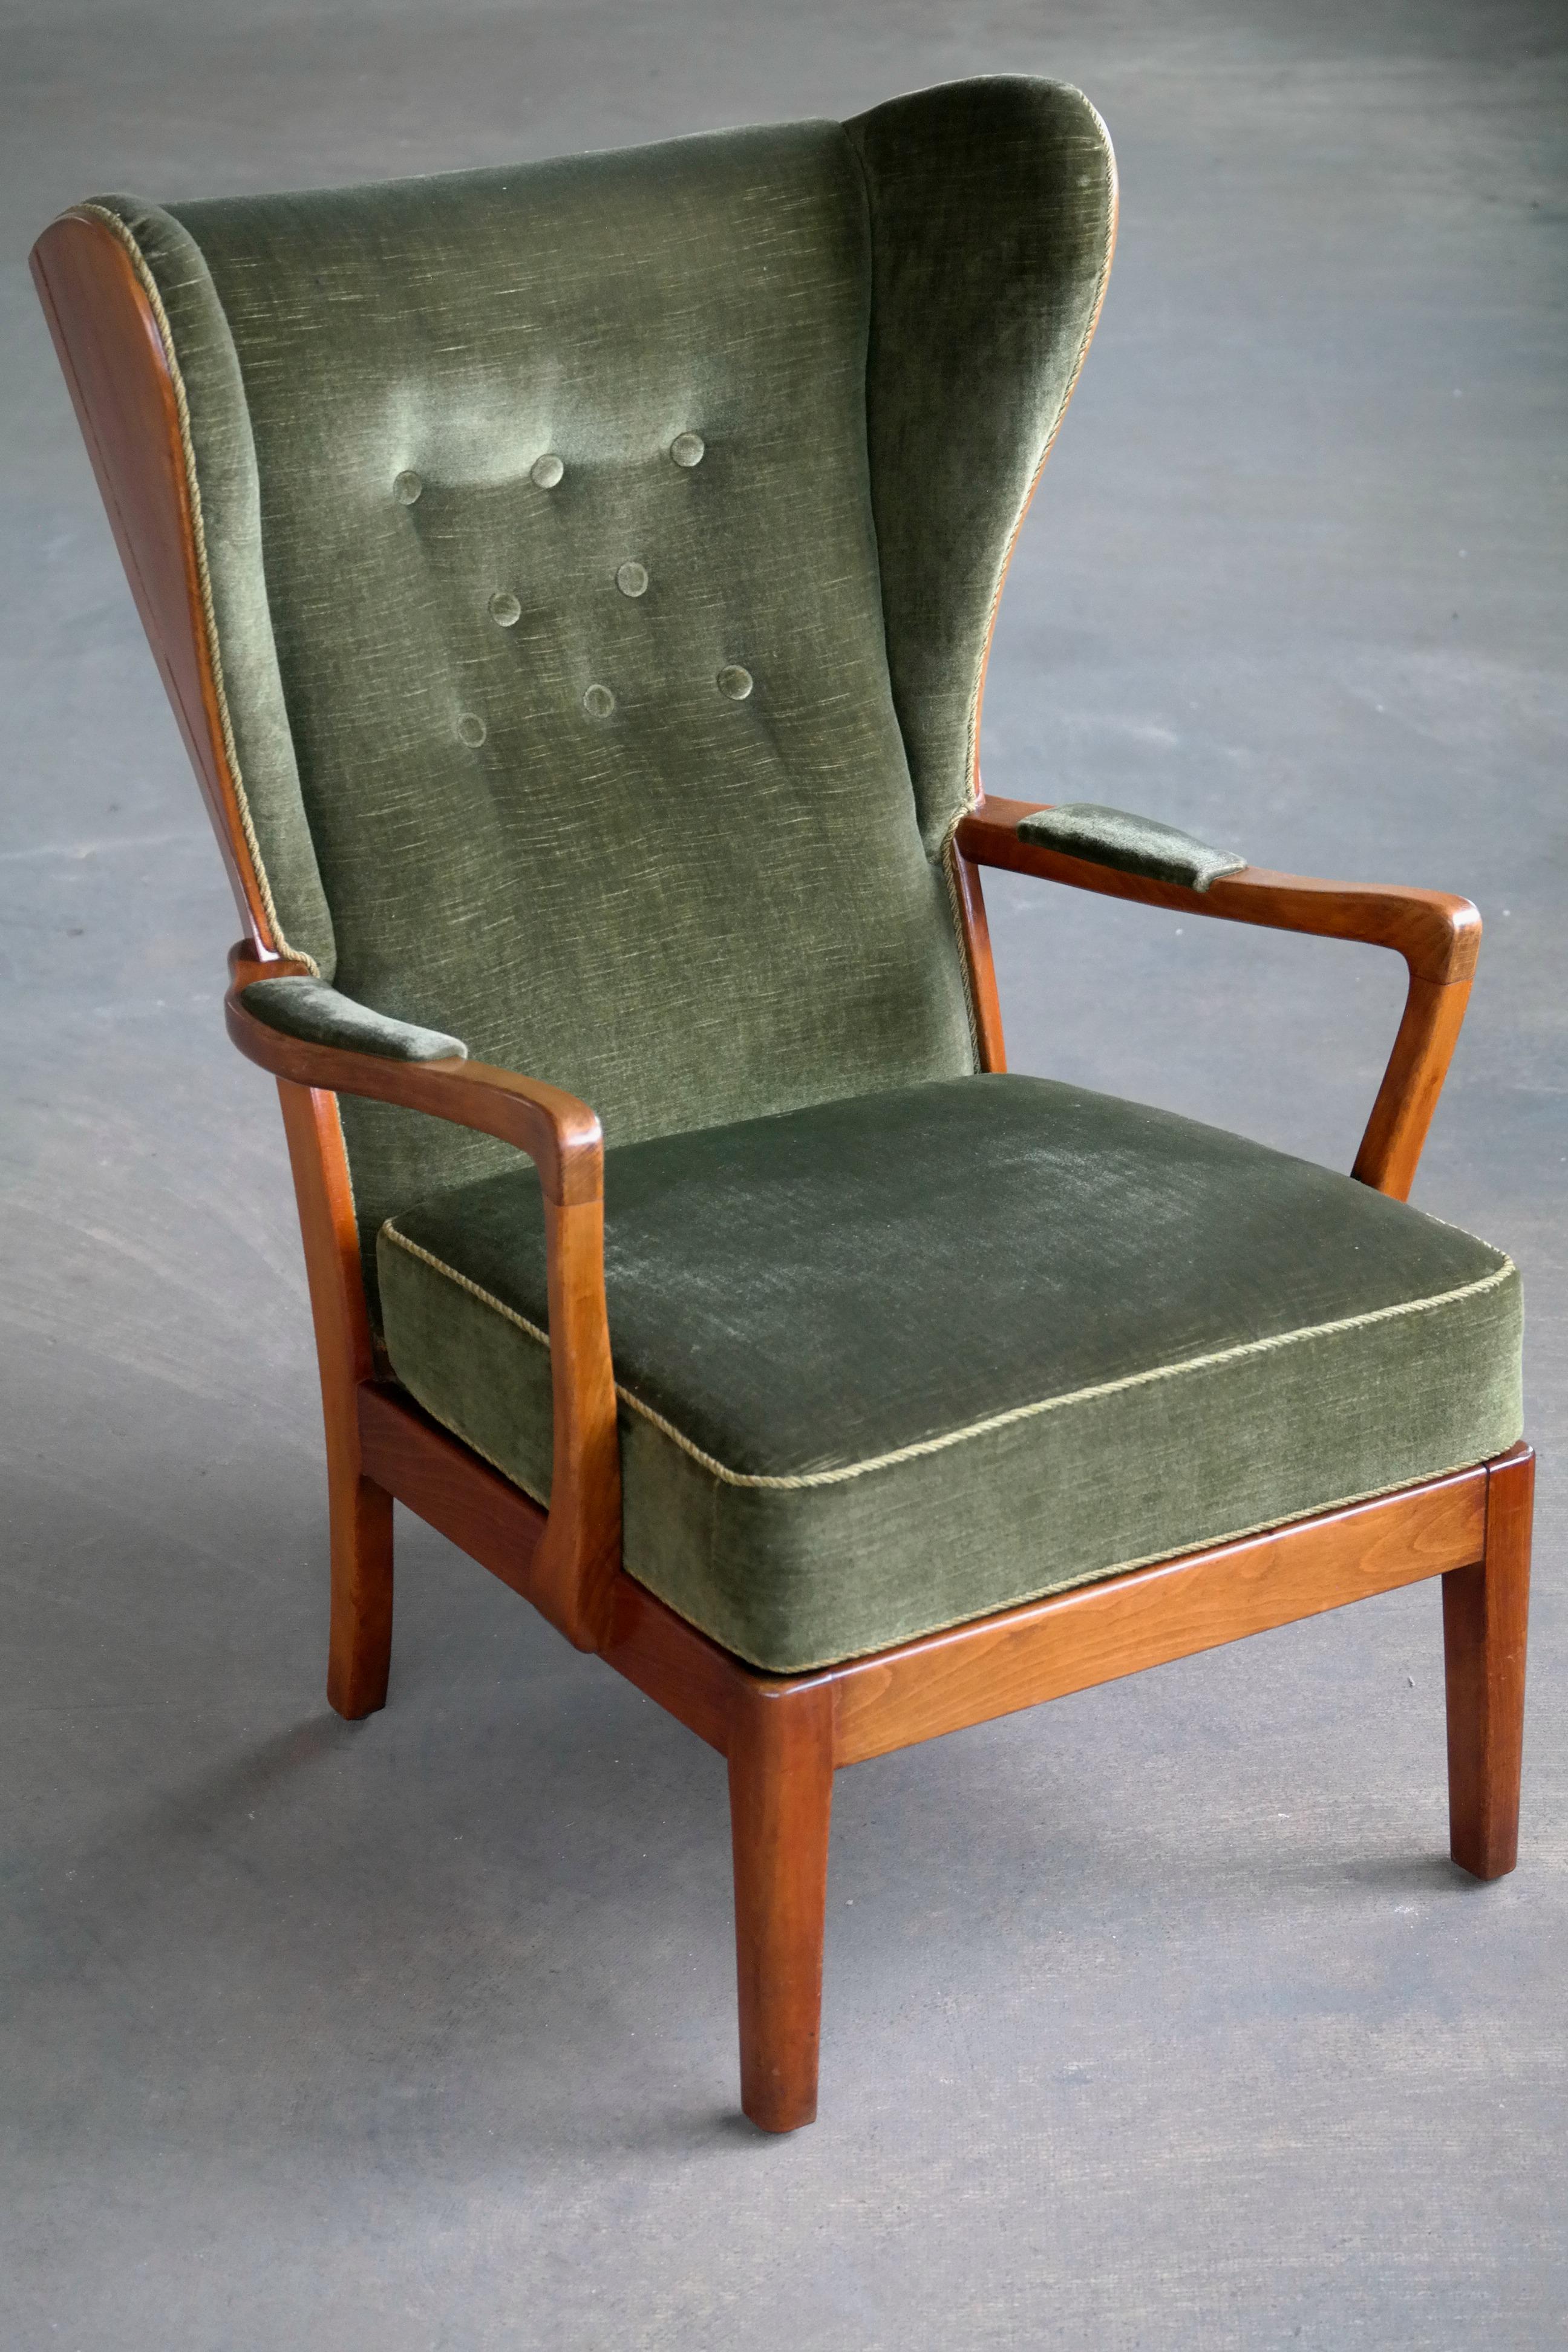 Mid-20th Century Danish Modern 1950s Highback Lounge Wing Chair Attributed to Fritz Hansen